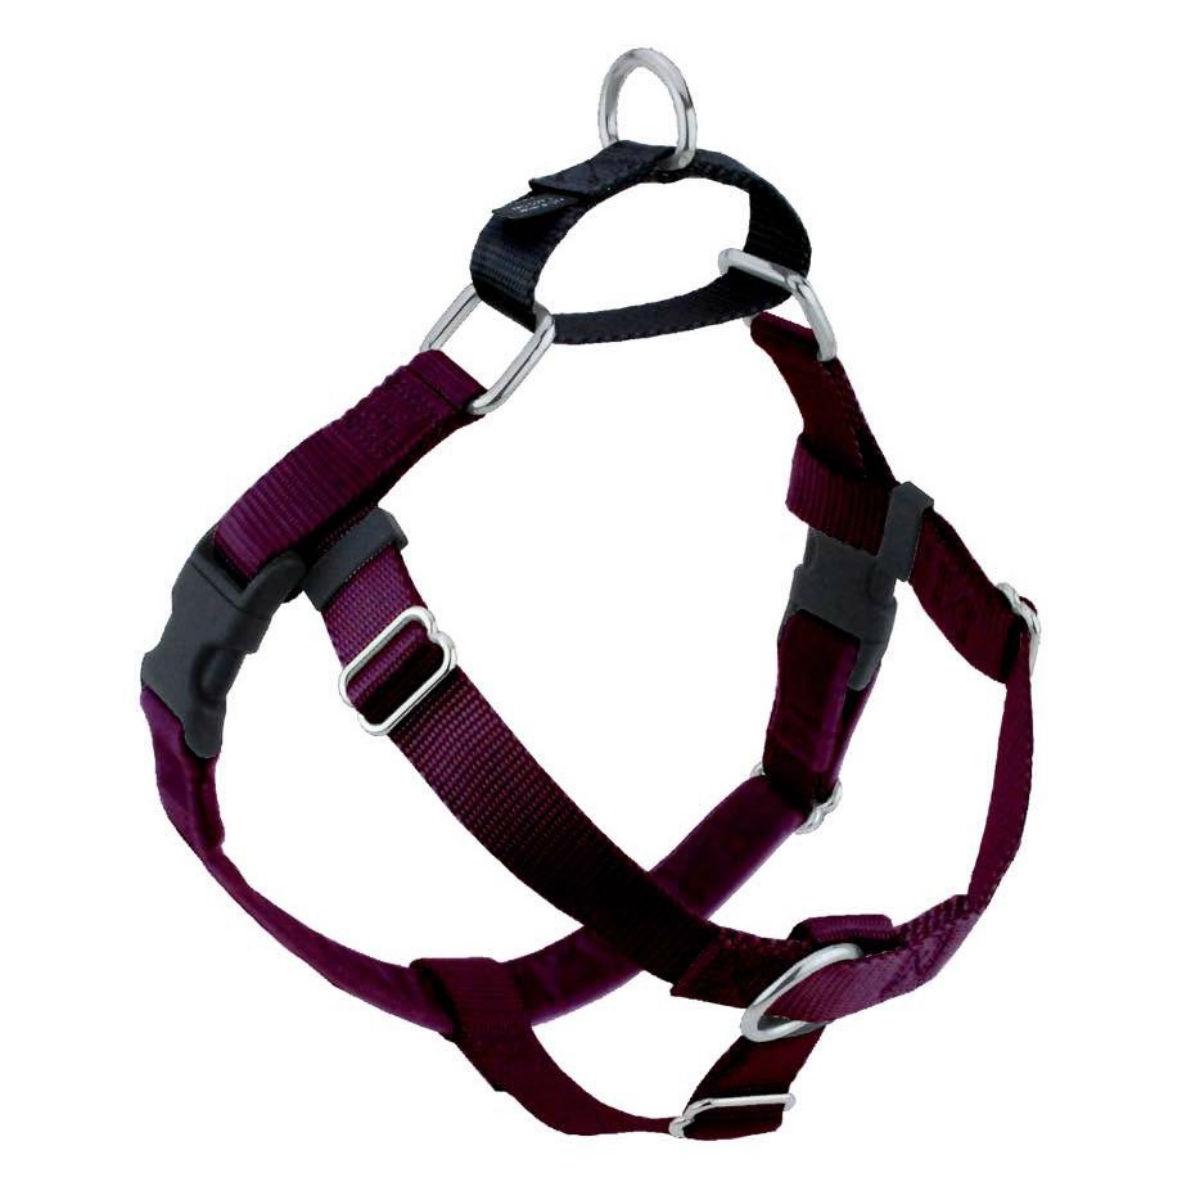 2 Hounds Design No-Pull Dog Harness Deluxe Training Package - Burgundy and Black